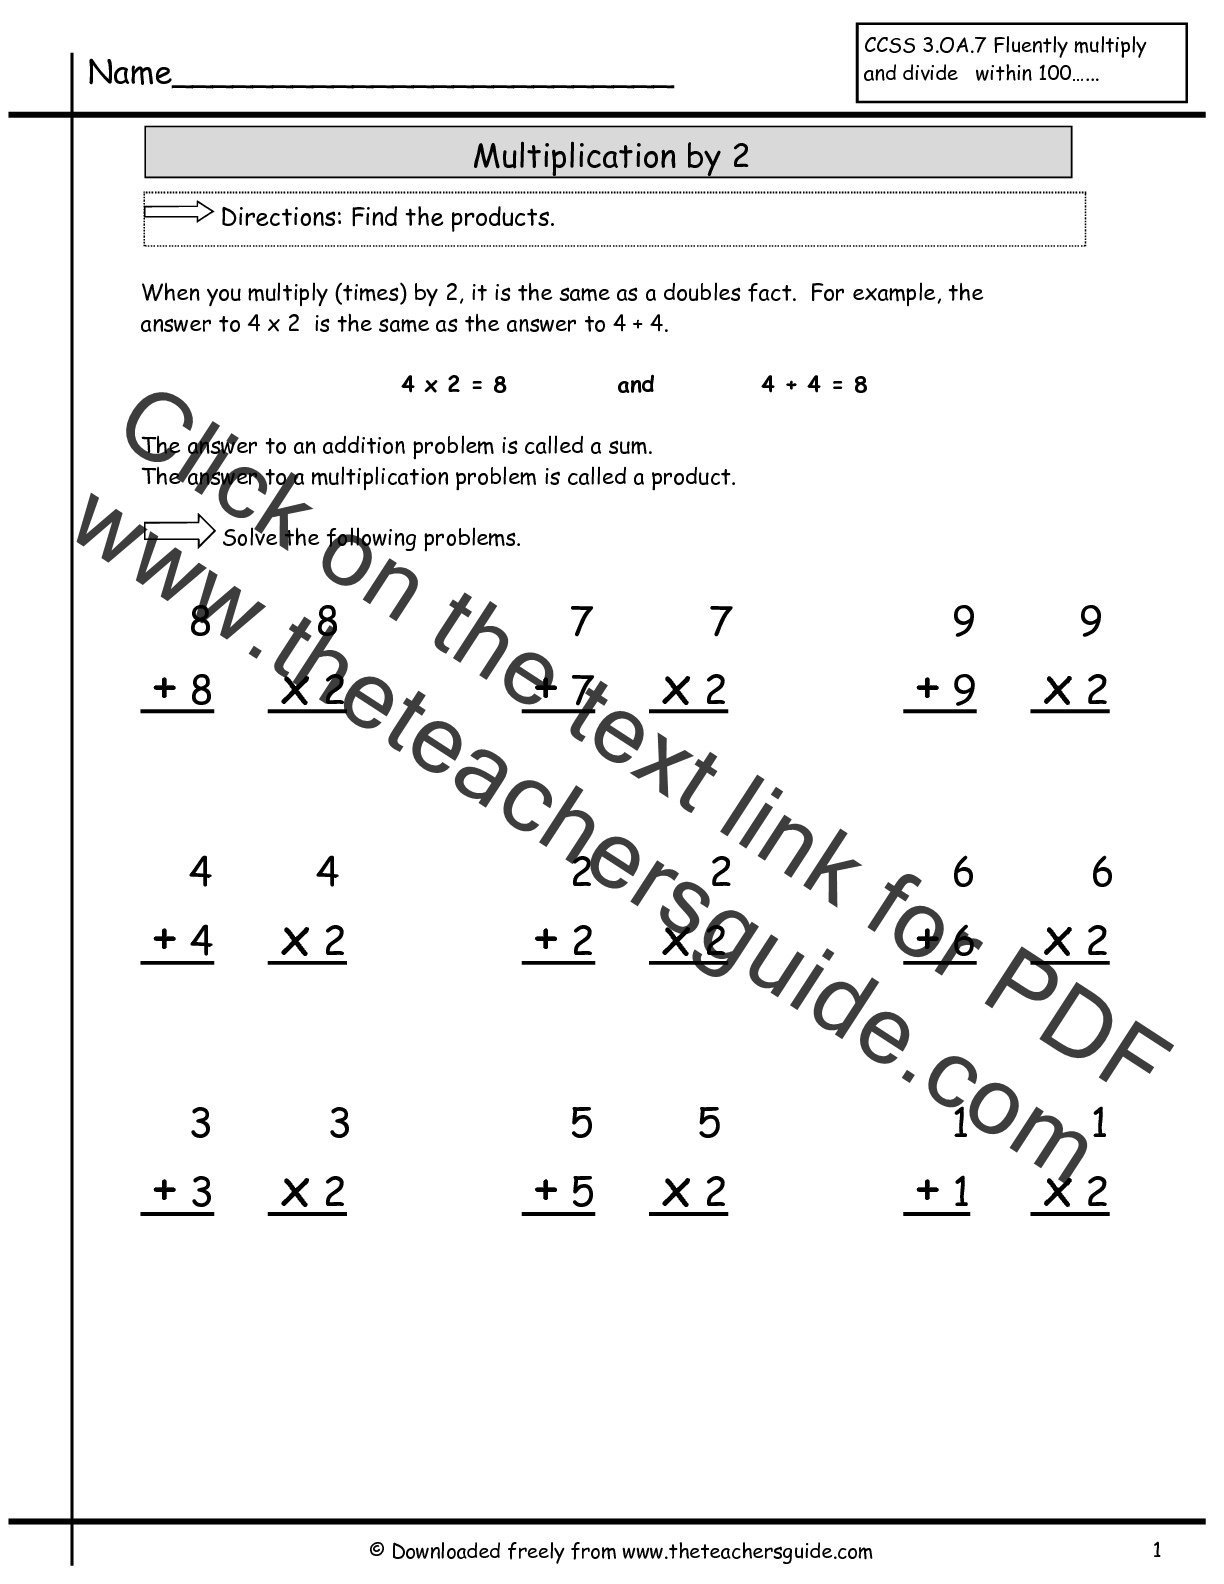 Multiplication Facts Worksheets From The Teacher s Guide